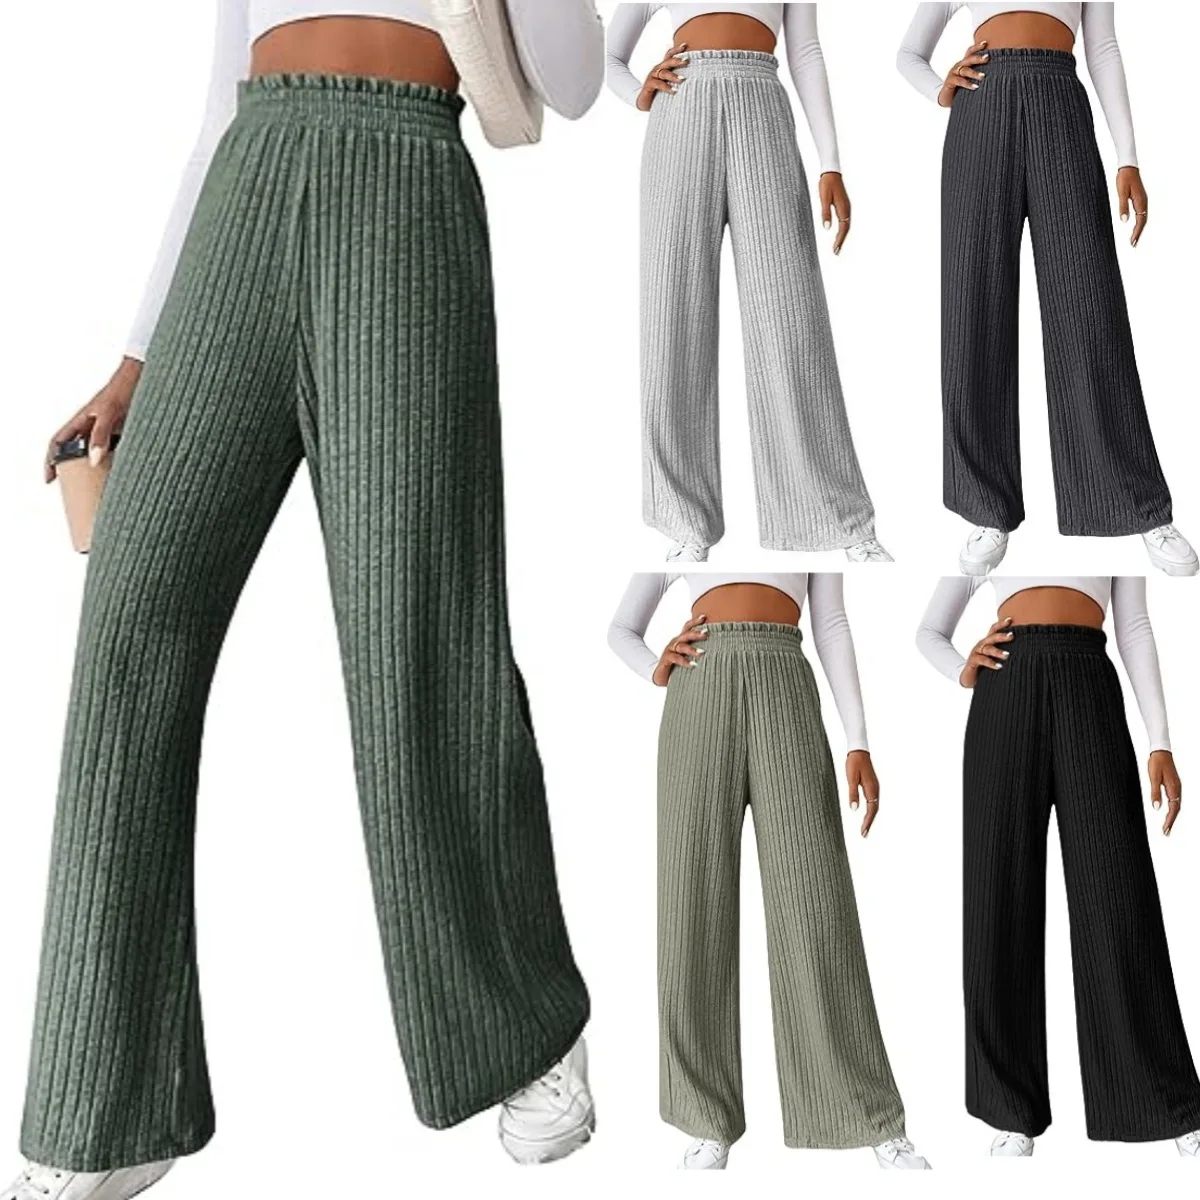 Yitimuceng Plain Fitness Joggers Travel Knitted Womens Outfits Long Sleeve Split Chic Casual Wide Leg Sweatpants Straight Pants travel st moritz chic книга